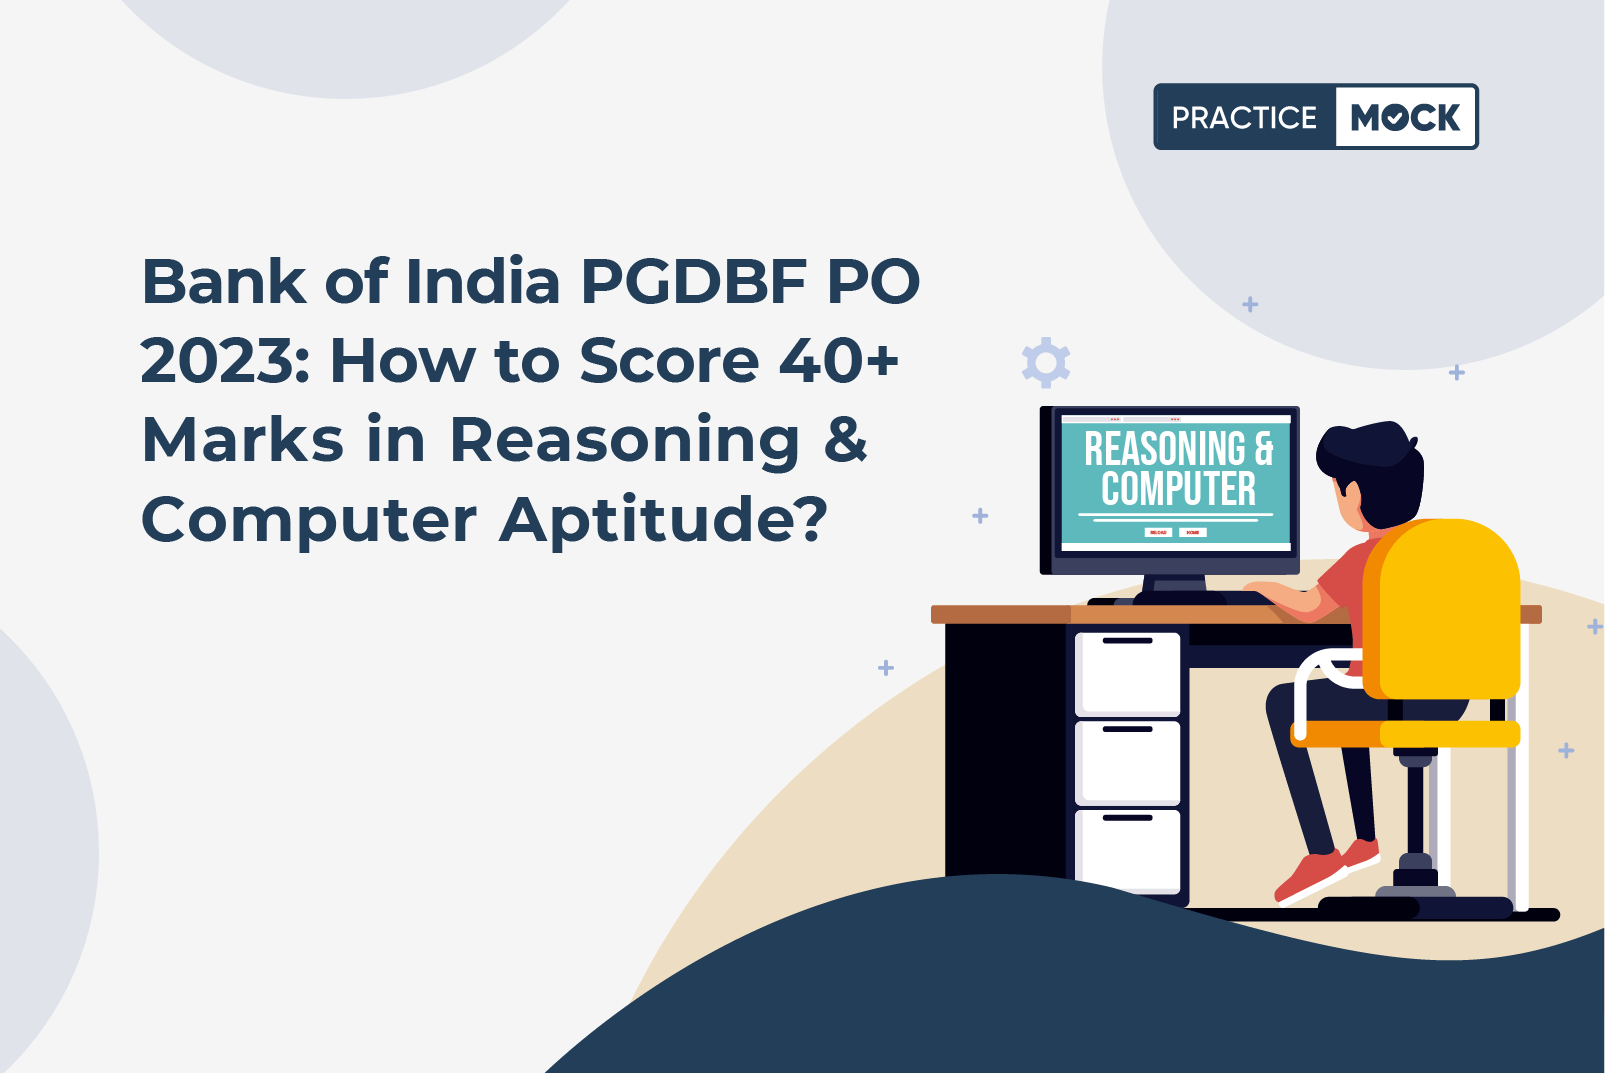 Bank of India PGDBF PO 2023-How to Score 40+ Marks in Reasoning and Computer Aptitude?